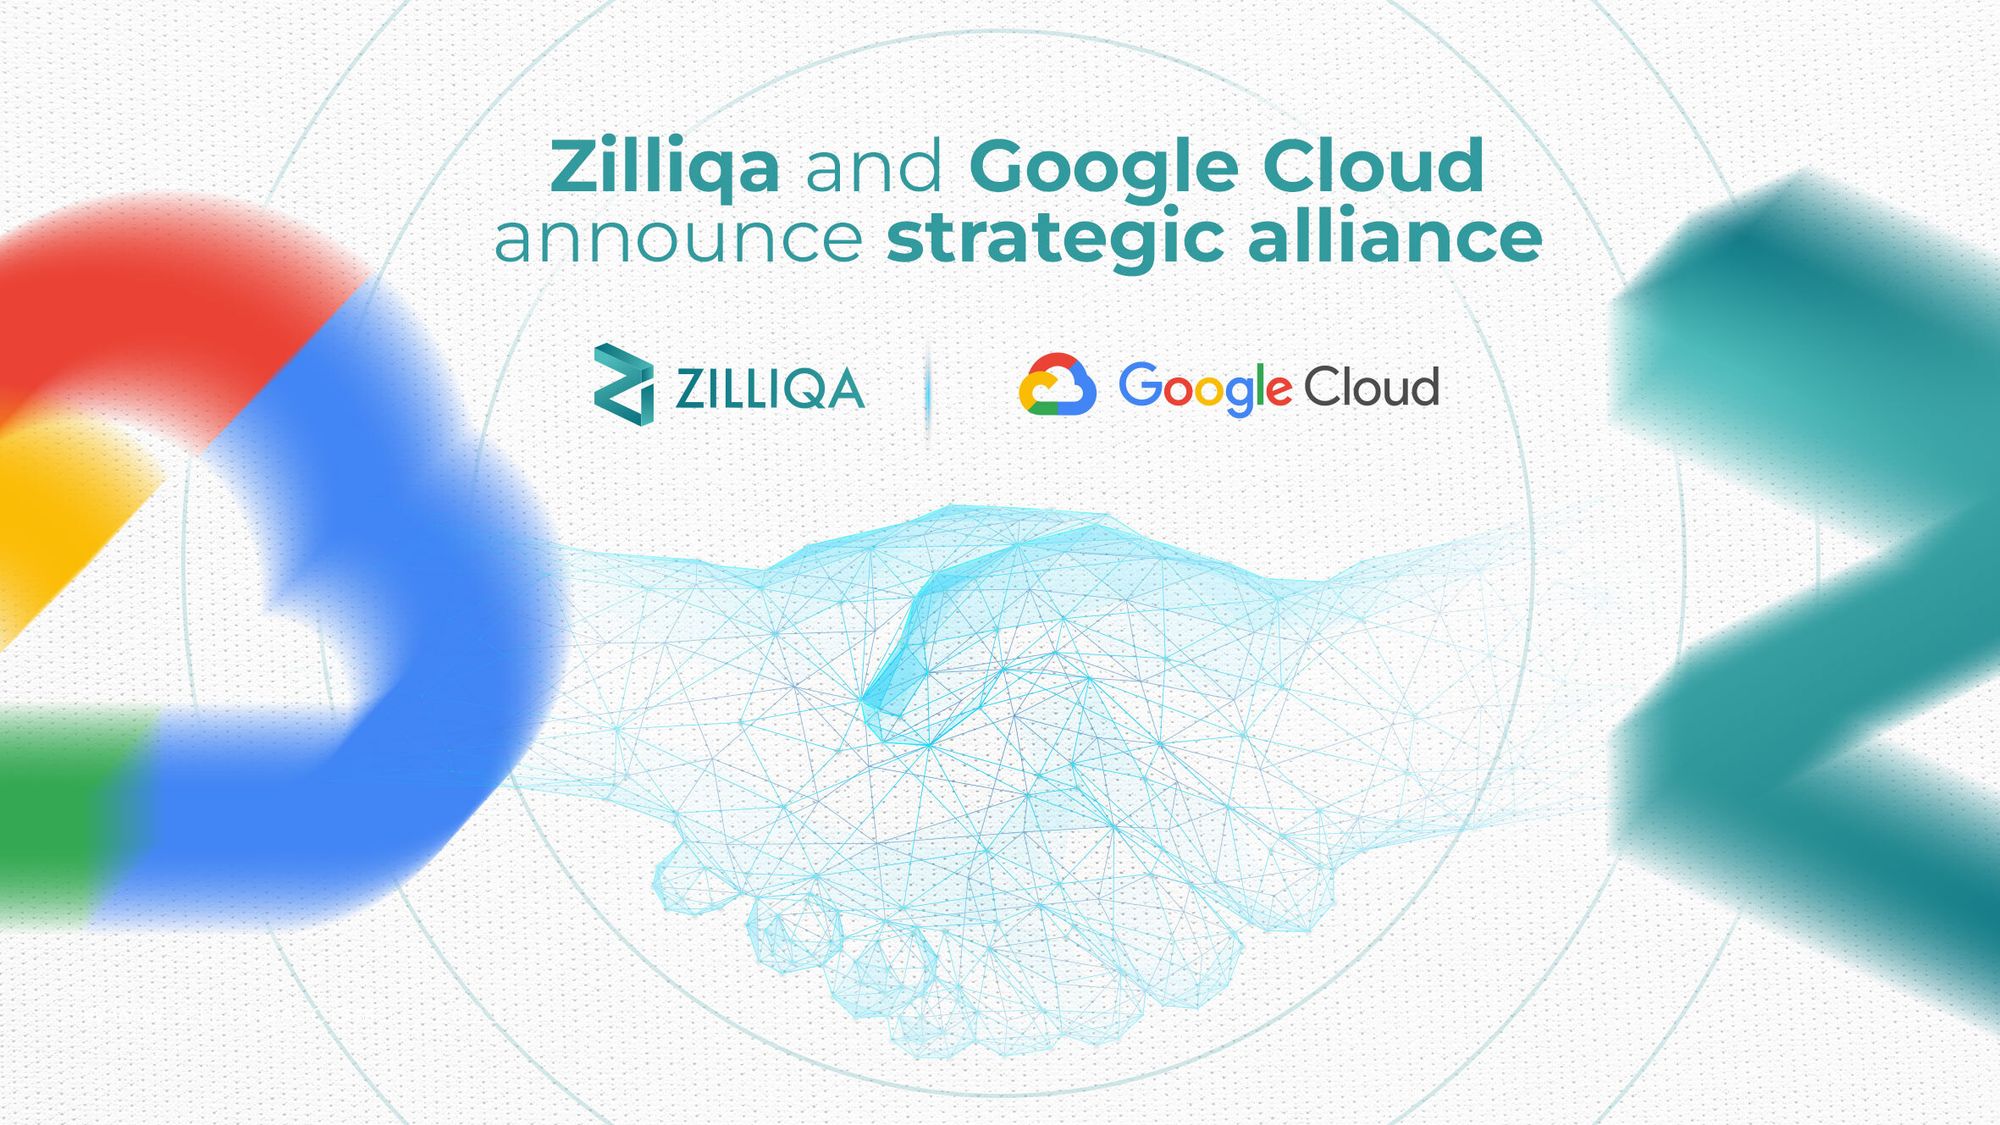 A visual announcing the alliance between Zilliqa and Google Cloud